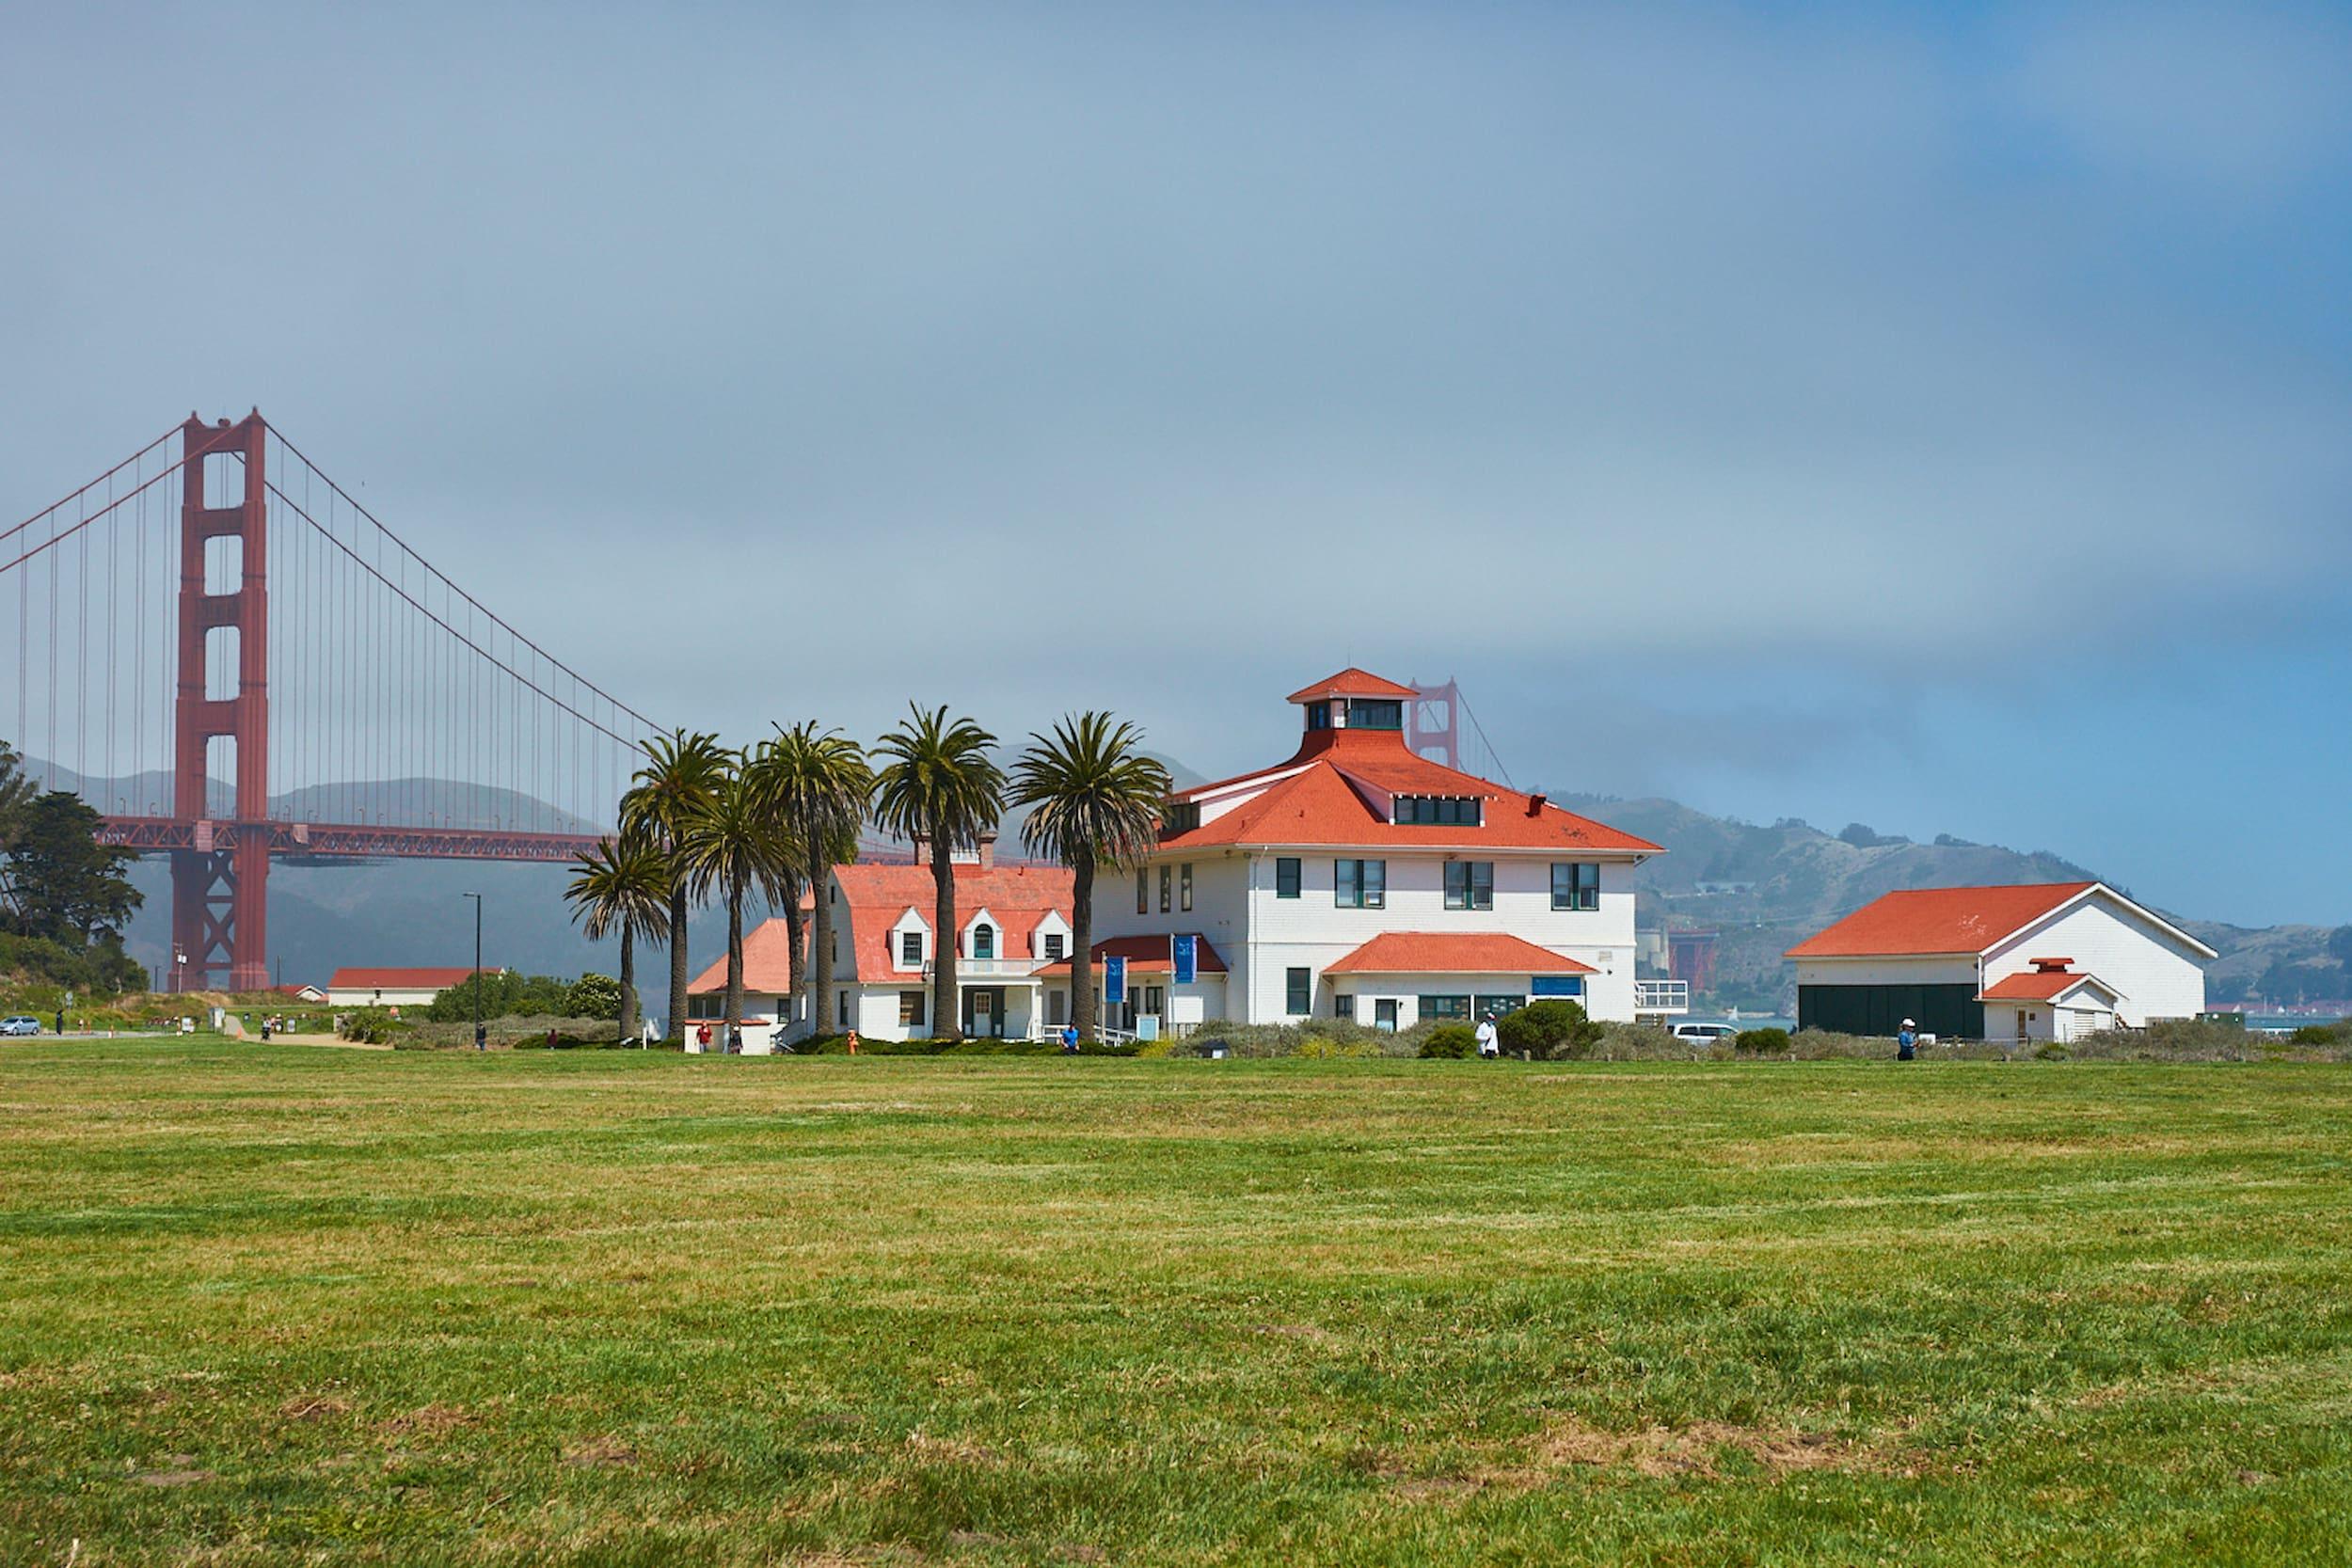 Crissy Field with the Golden Gate Bridge in the background.